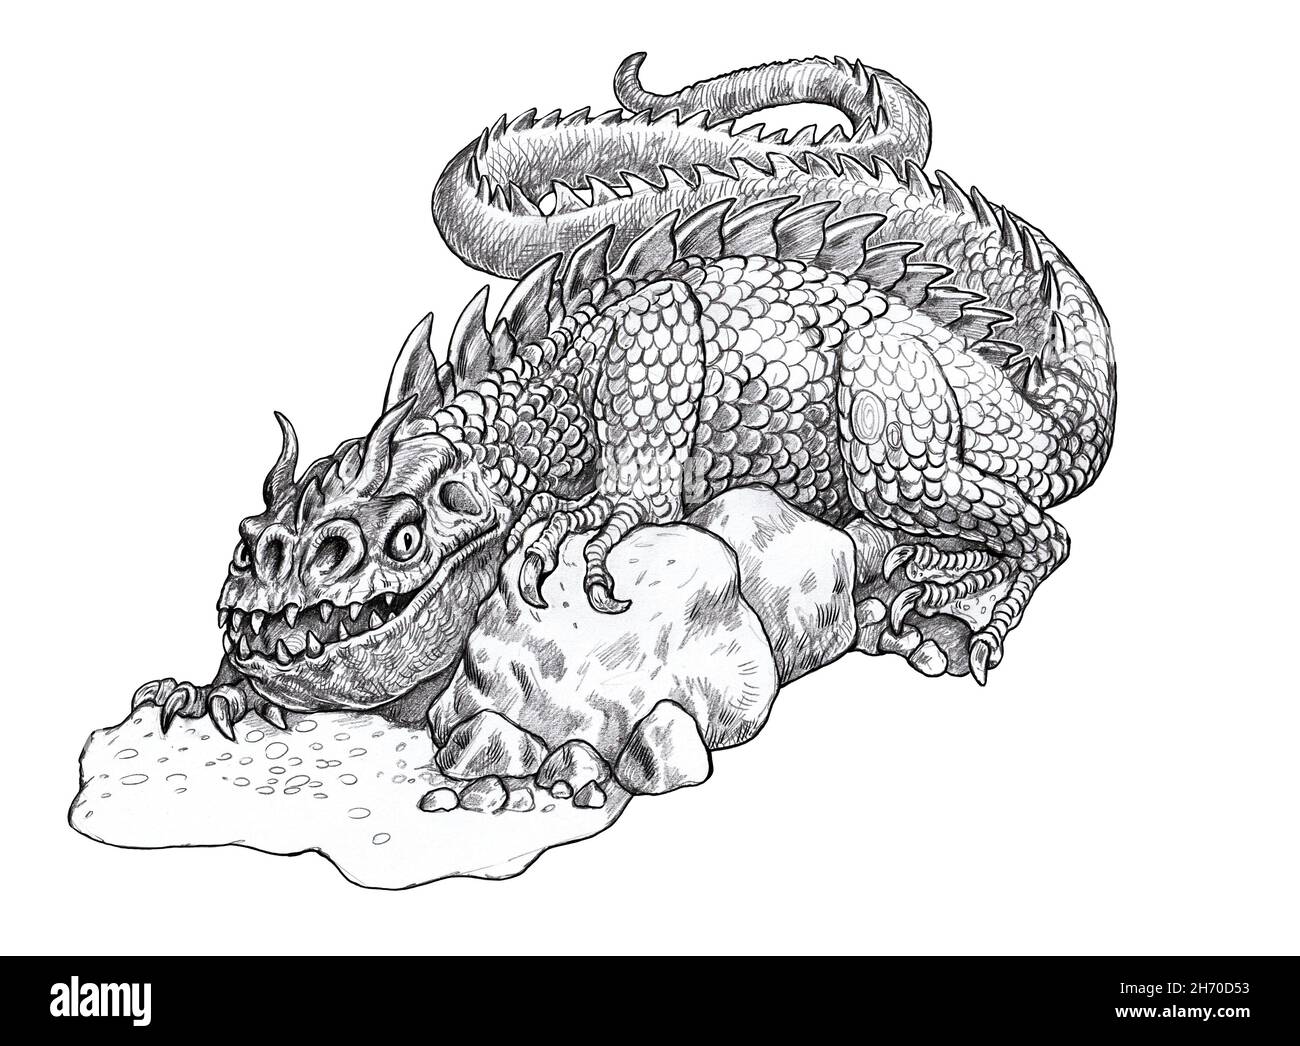 Funny dragon with horns. Fantasy drawing. Stock Photo